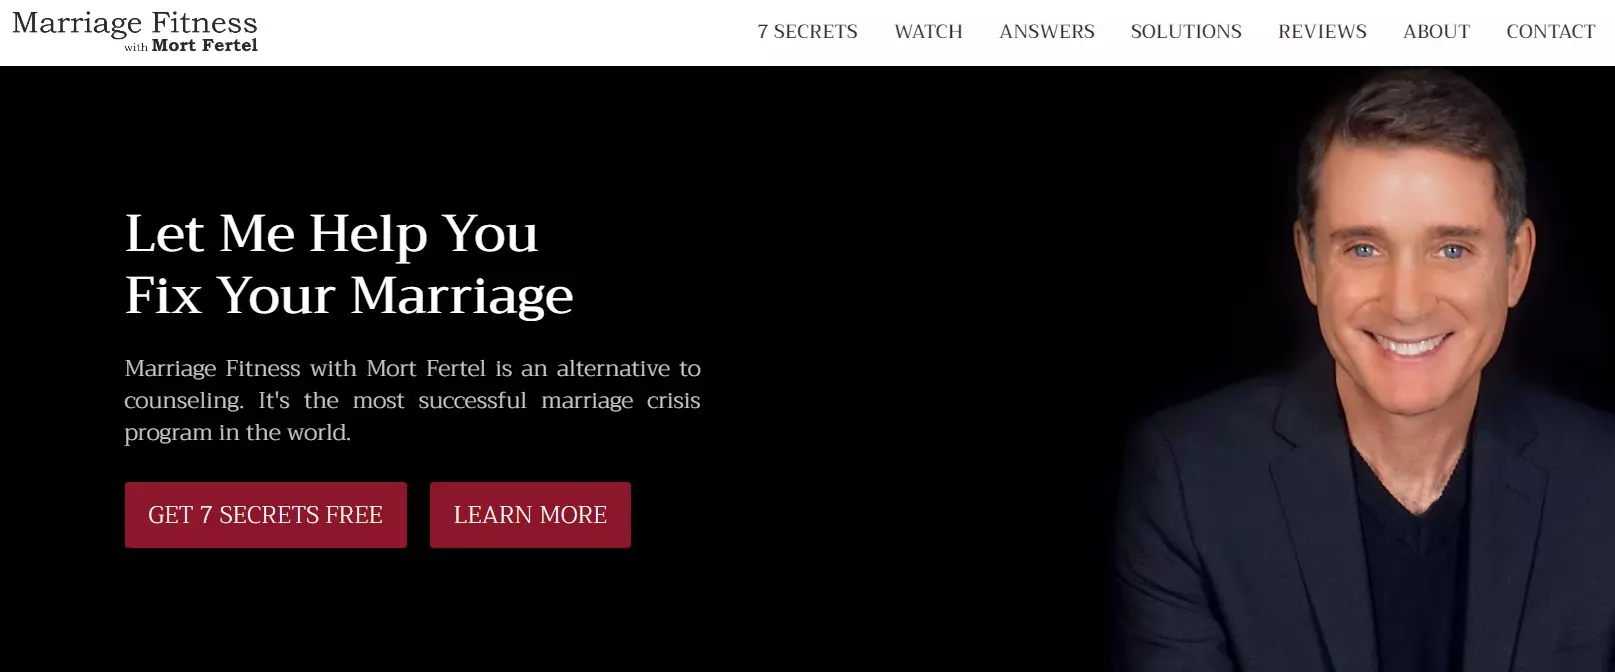 marriage fitness siteweb